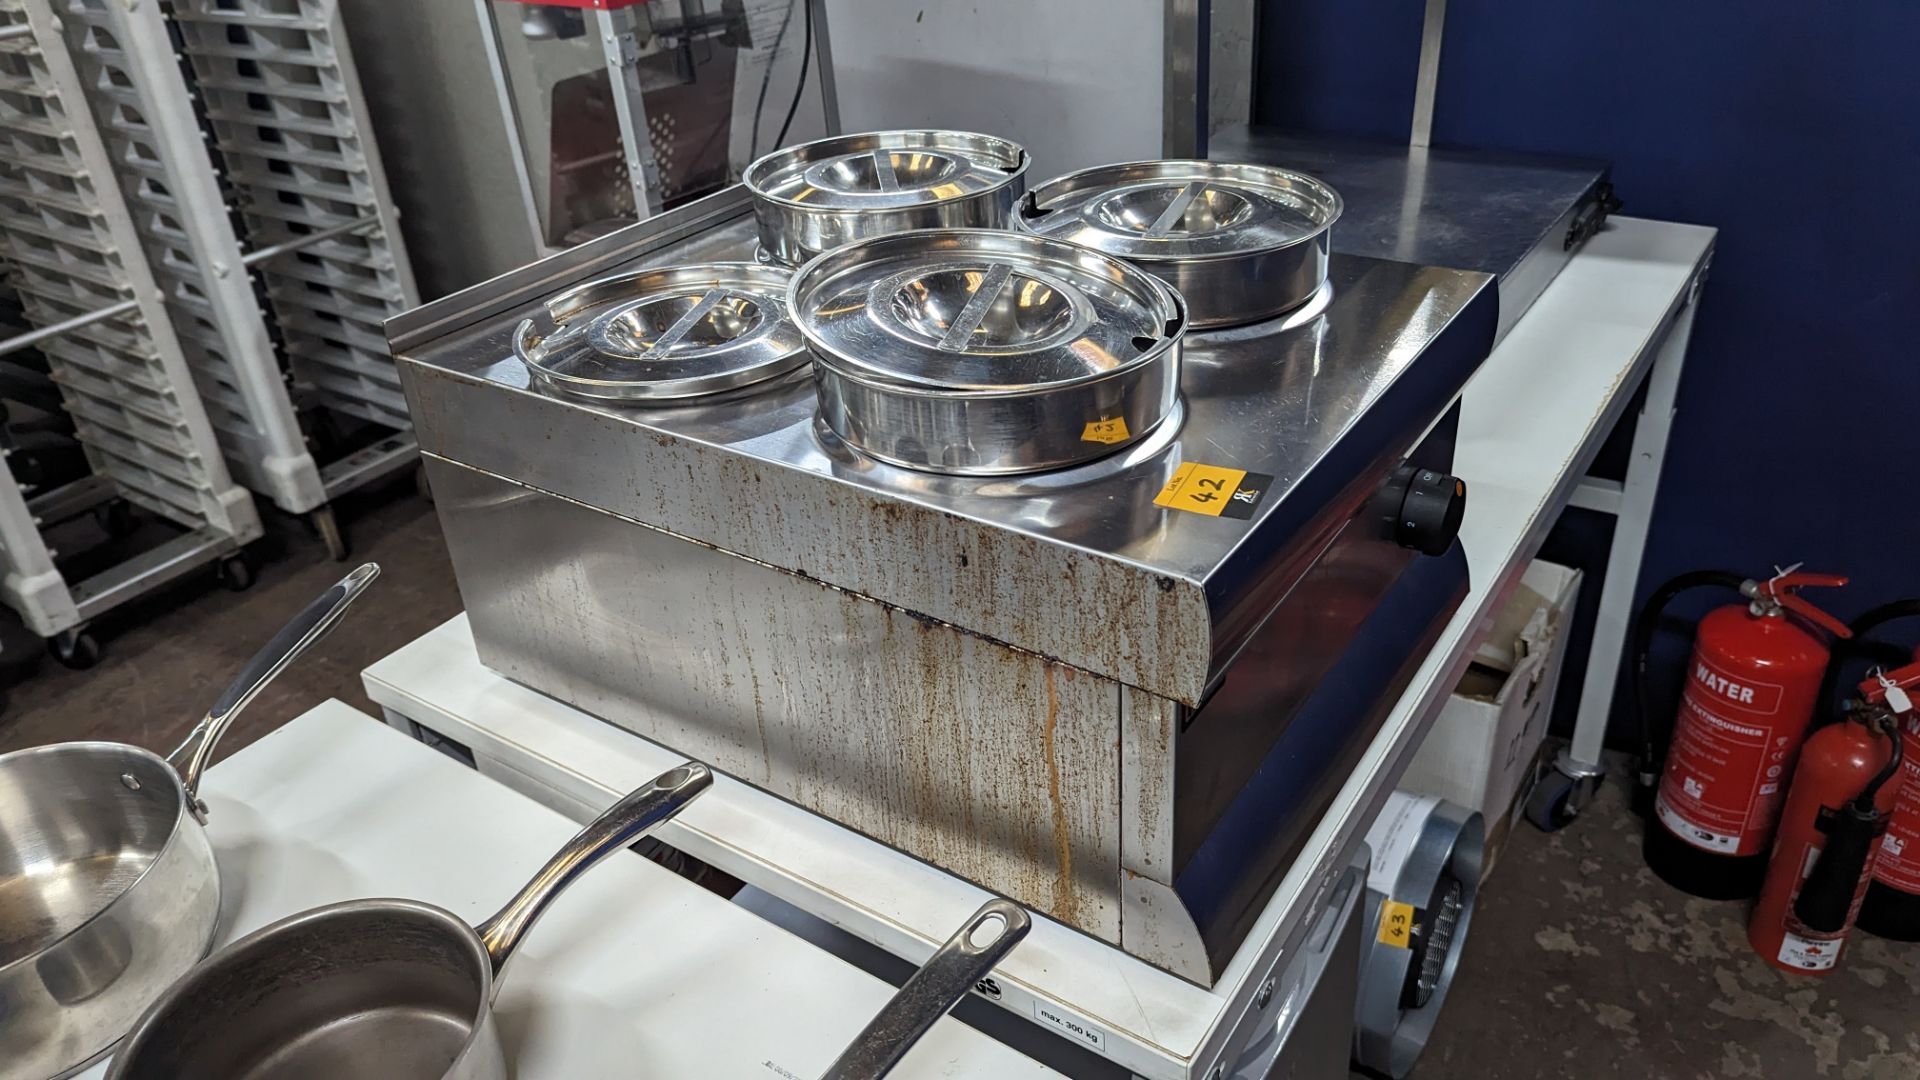 Lincat stainless steel benchtop 4 compartment bain marie including 3 removable circular pots & 4 lid - Image 3 of 4